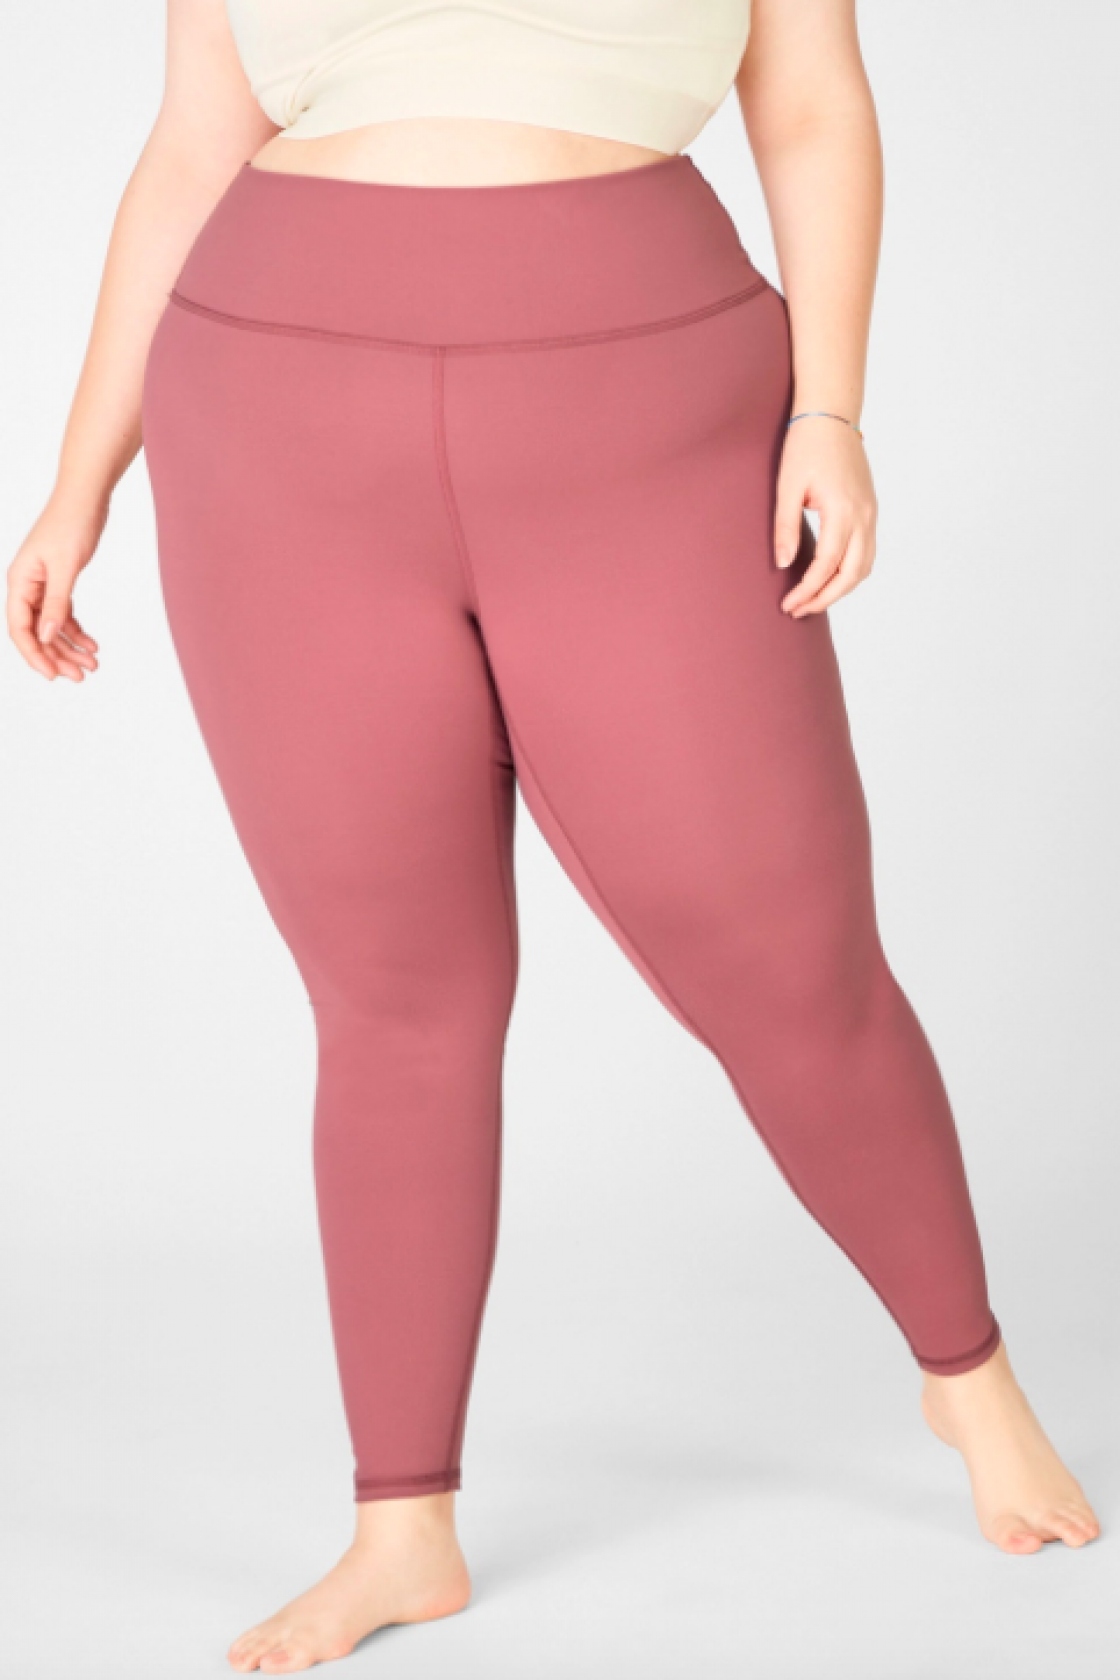 Fabletics: Are They Squat Proof?!